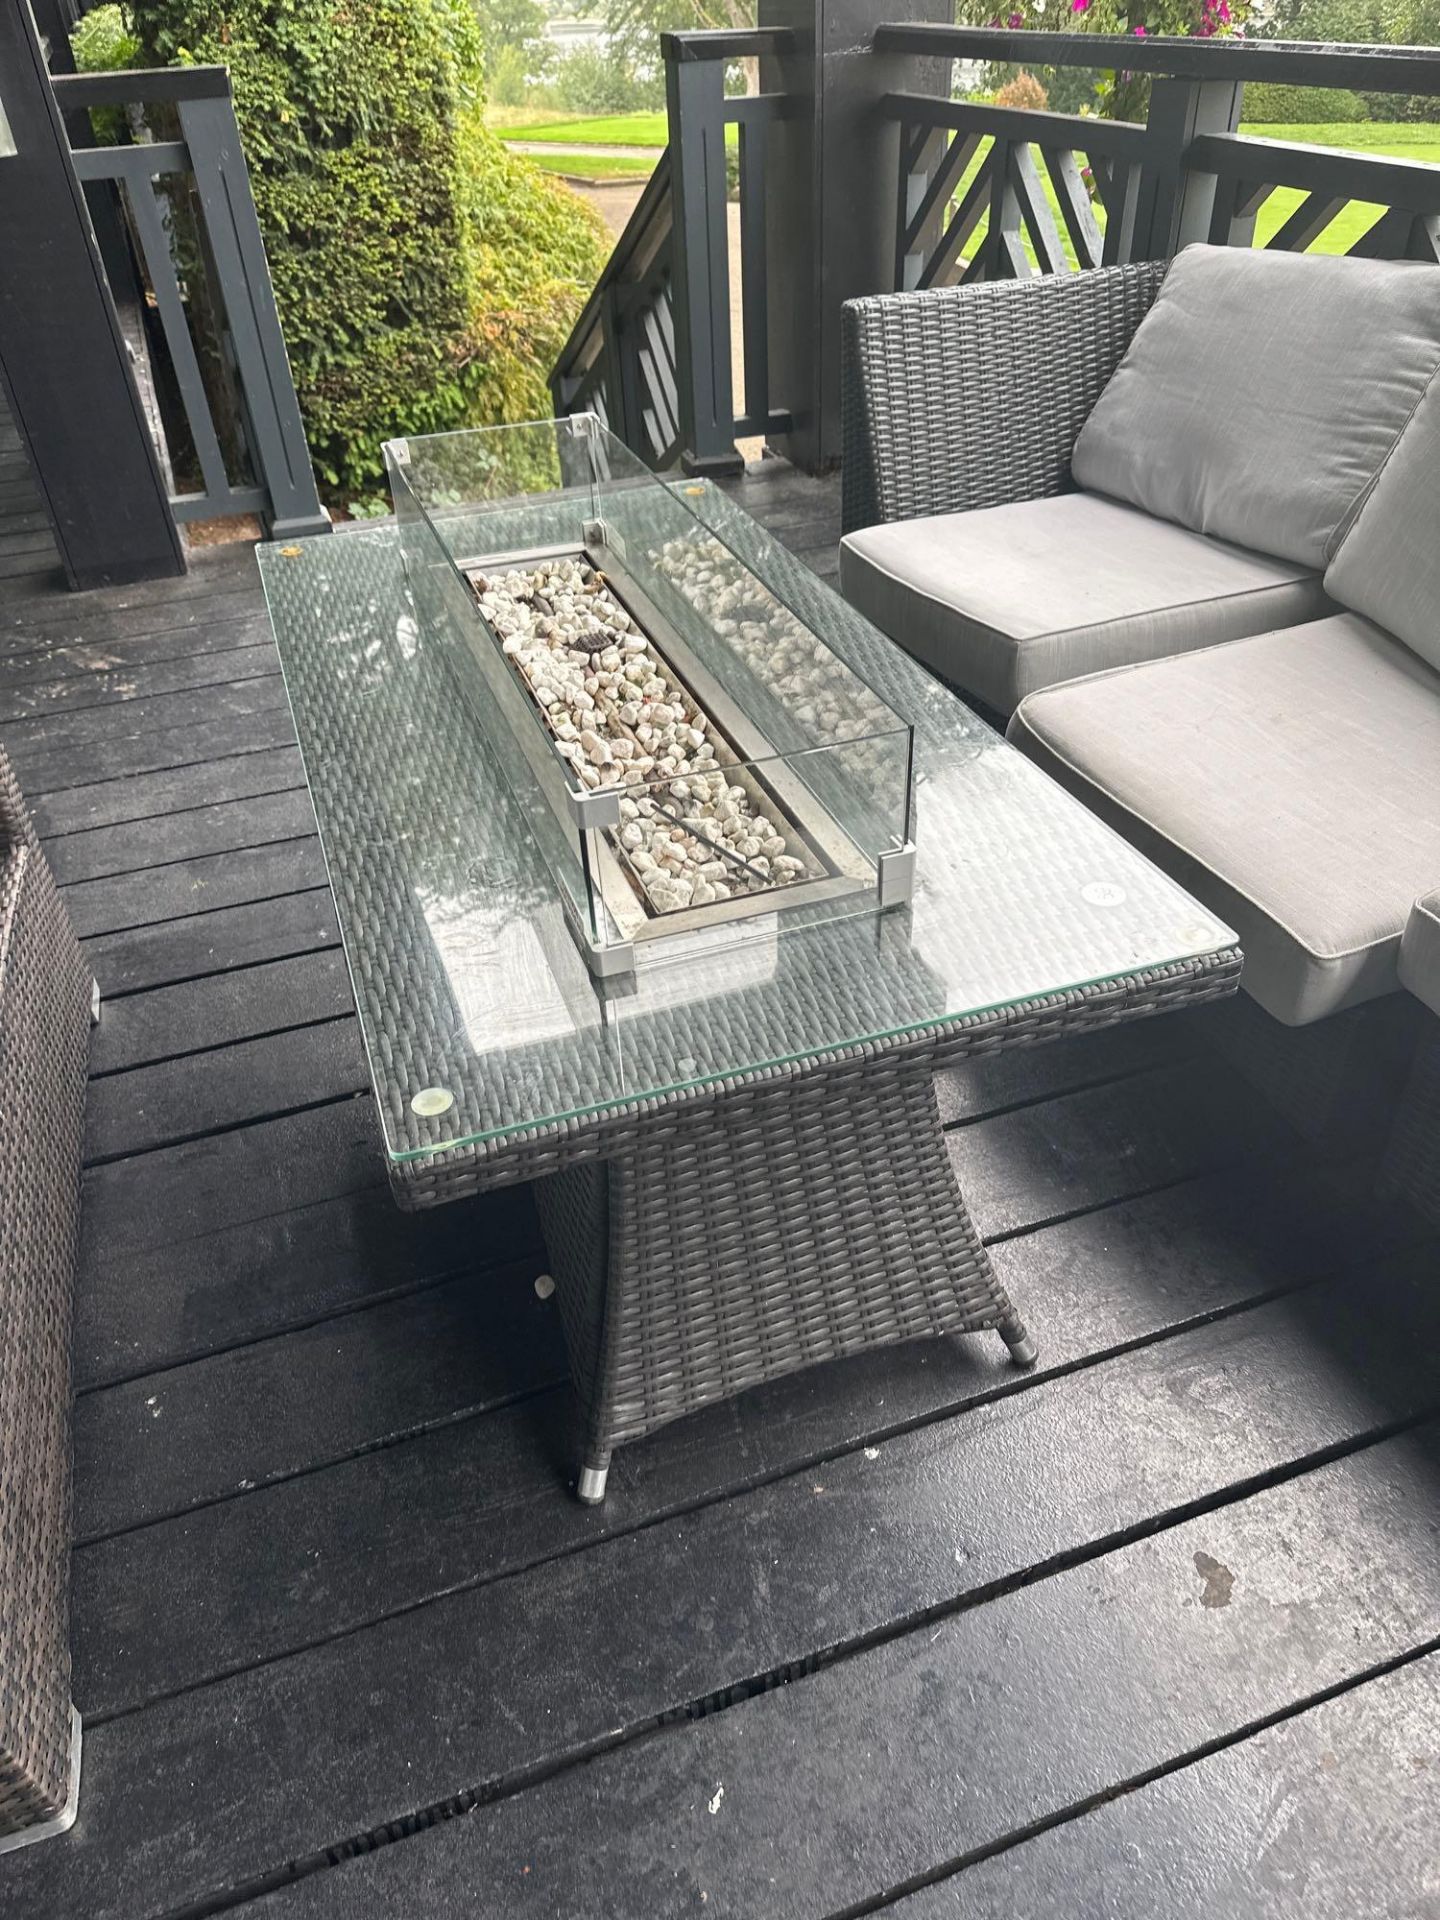 Wicker Propane Gas Fire Pit Table 140 x 73 x 78cm ( Location: Garden) - Image 3 of 3